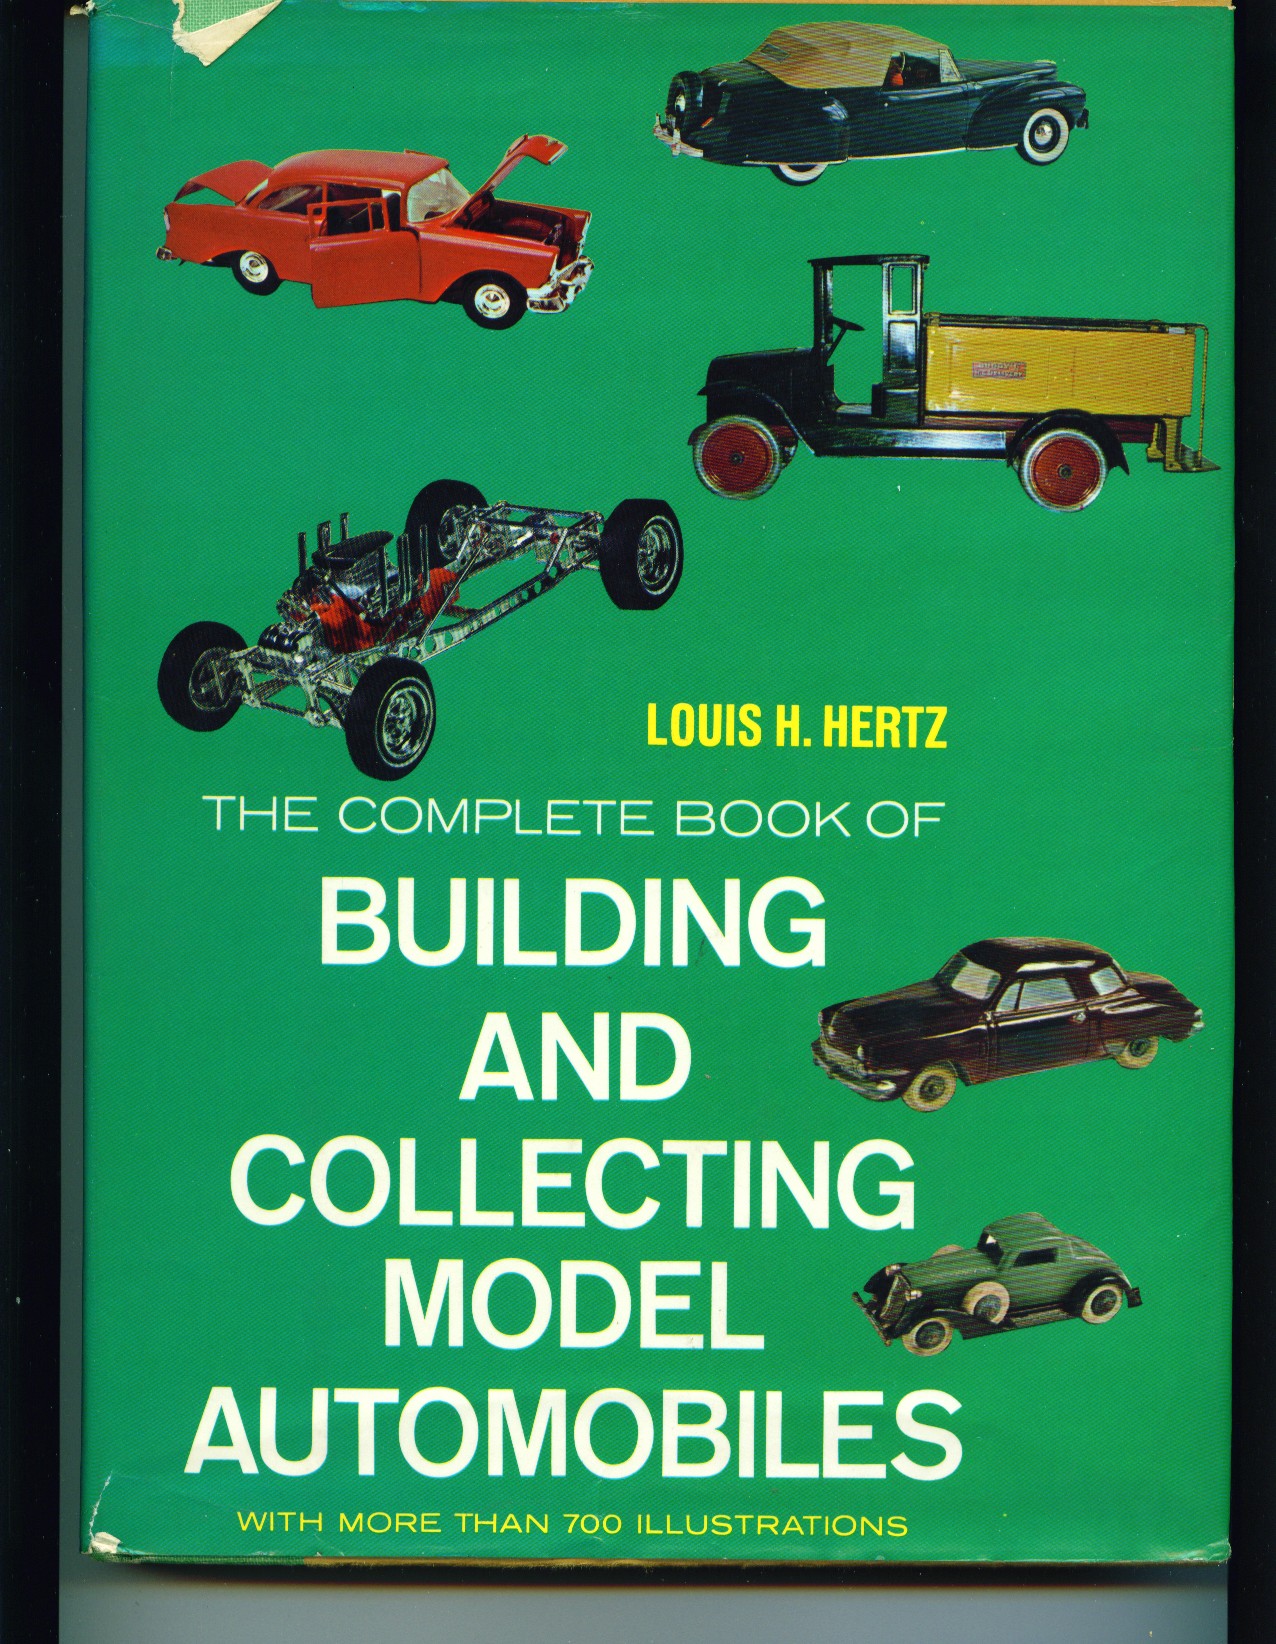 Building & collecting model automobiles